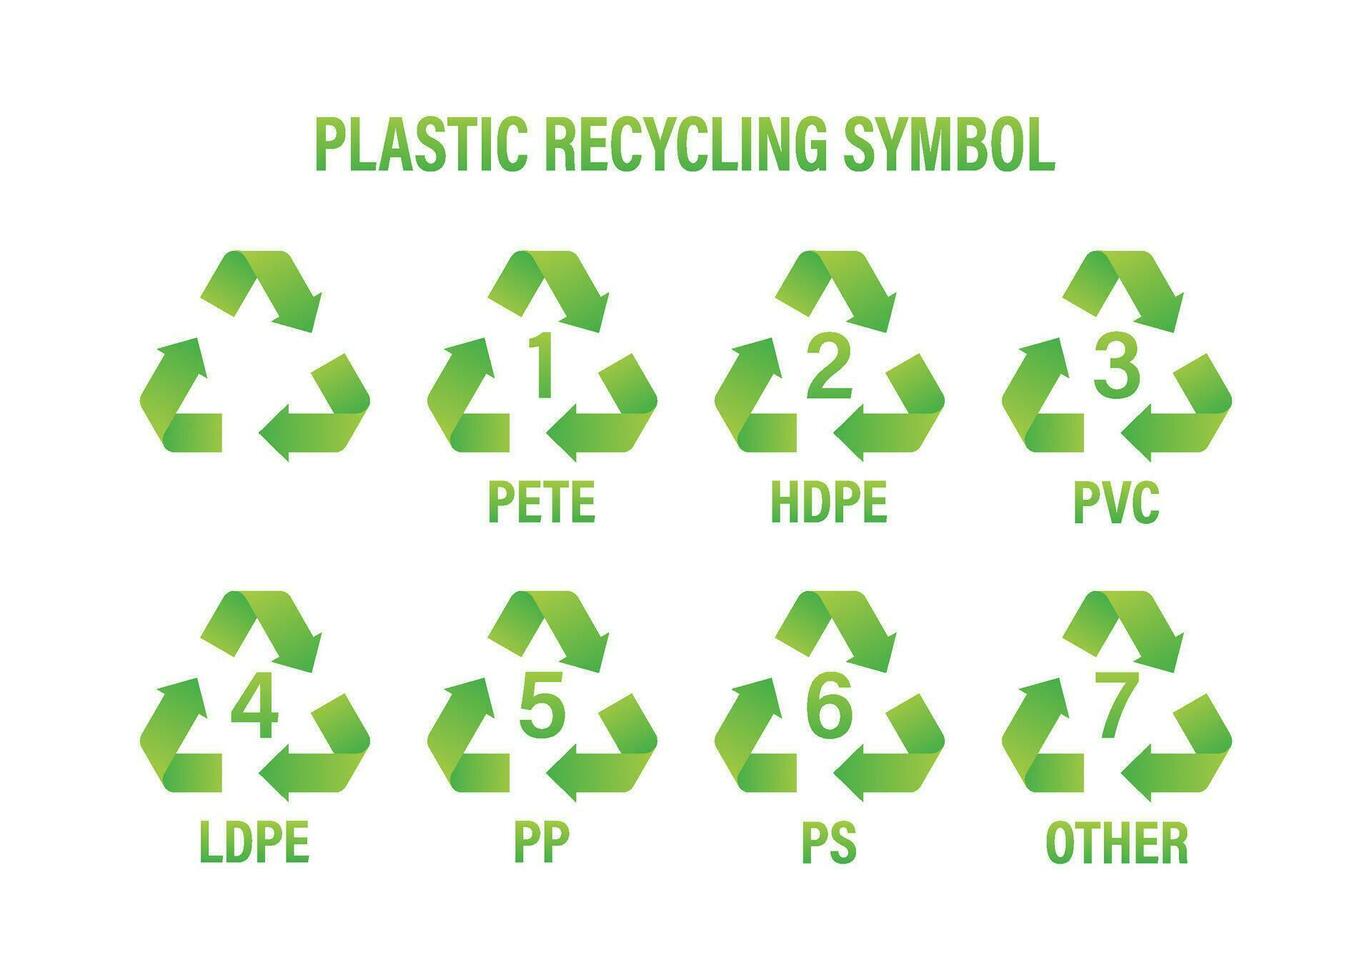 Recycle icon symbol vector. Plastic recycling, great design for any purposes. Recycle recycling symbol. Vector stock illustration